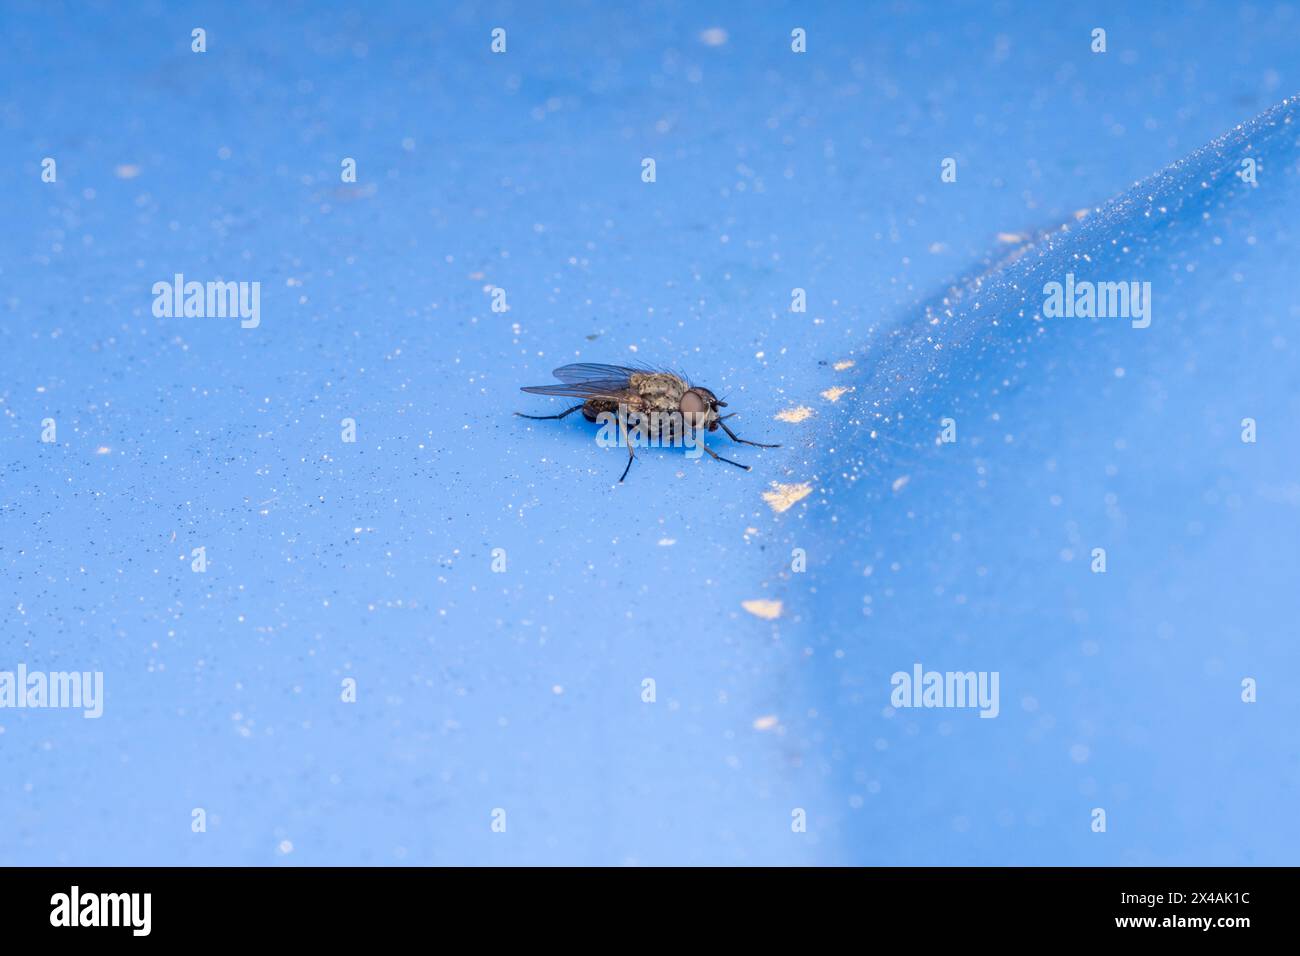 Famille Anthomyiidae Root-Maggot fly nature sauvage papier peint insecte, image, photographie Banque D'Images